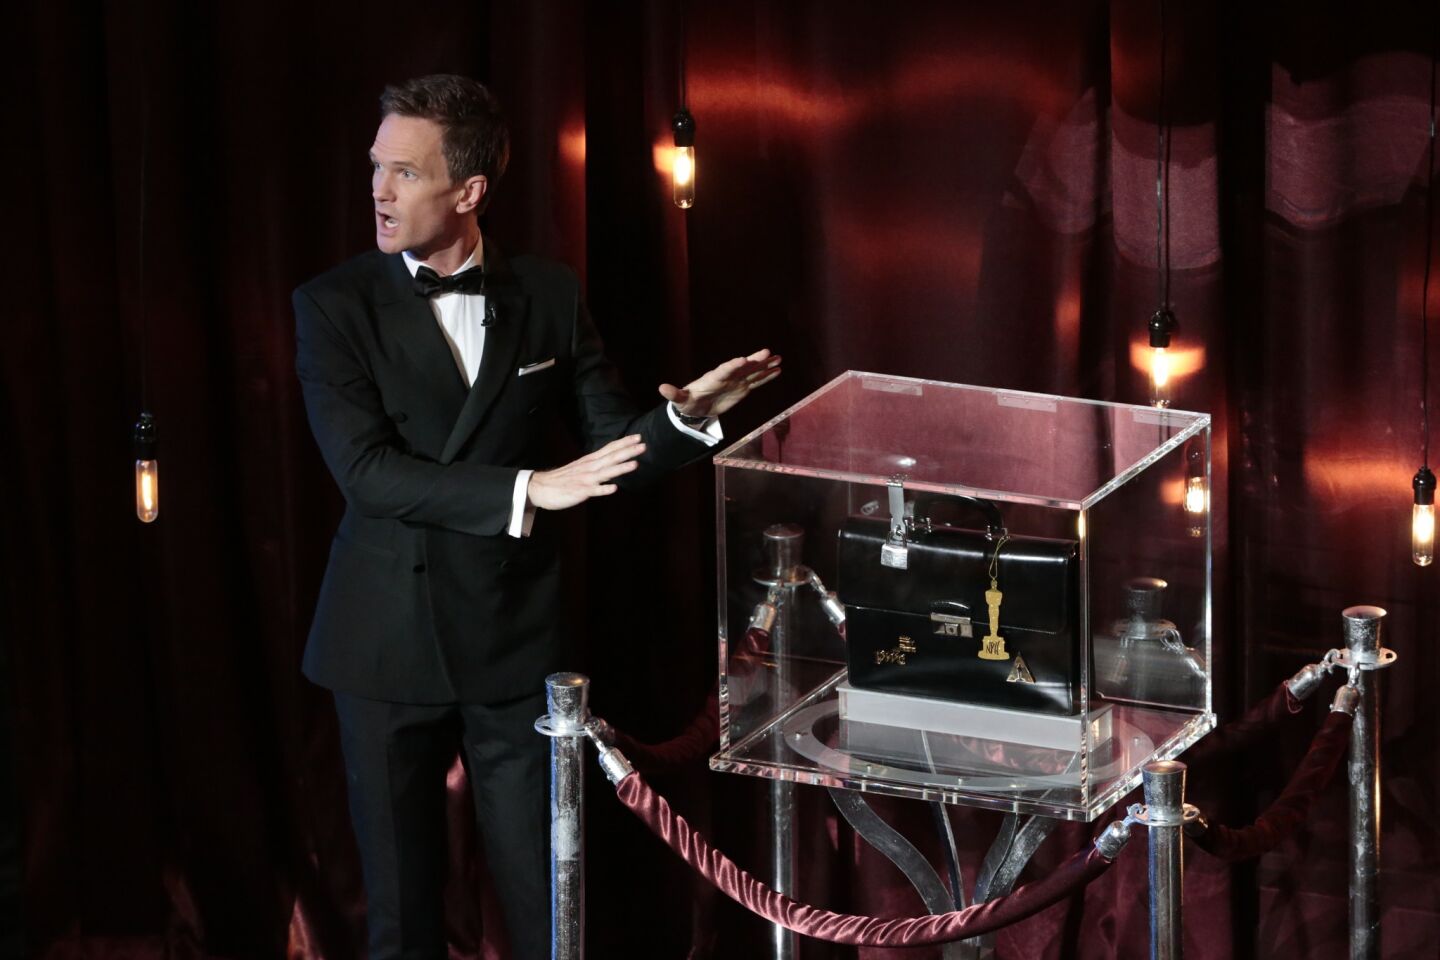 After hosting the Emmys and the Tonys, jack-of-all-trades Neil Patrick Harris took over Oscar duties in 2015 with mixed results. In addition to butchering actors' names and making an ill-advised joke about Edward Snowden's absence, Harris strained the patience of even the most faithful viewers with a running gag involving a magic box holding his winners predictions.